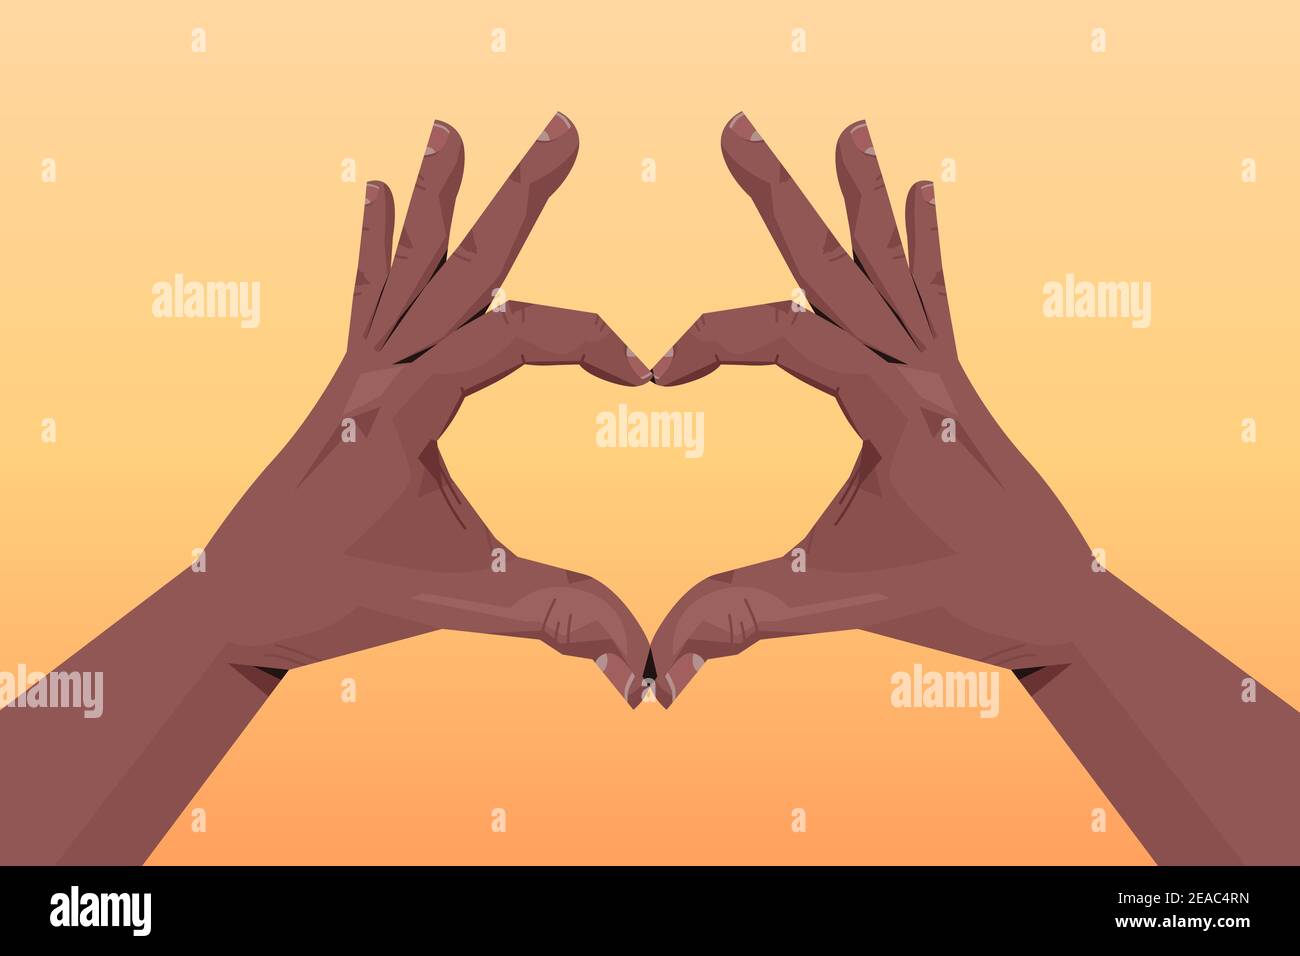 african american human hands making heart shape gesture communication language gesturing concept horizontal isolated vector illustration Stock Vector